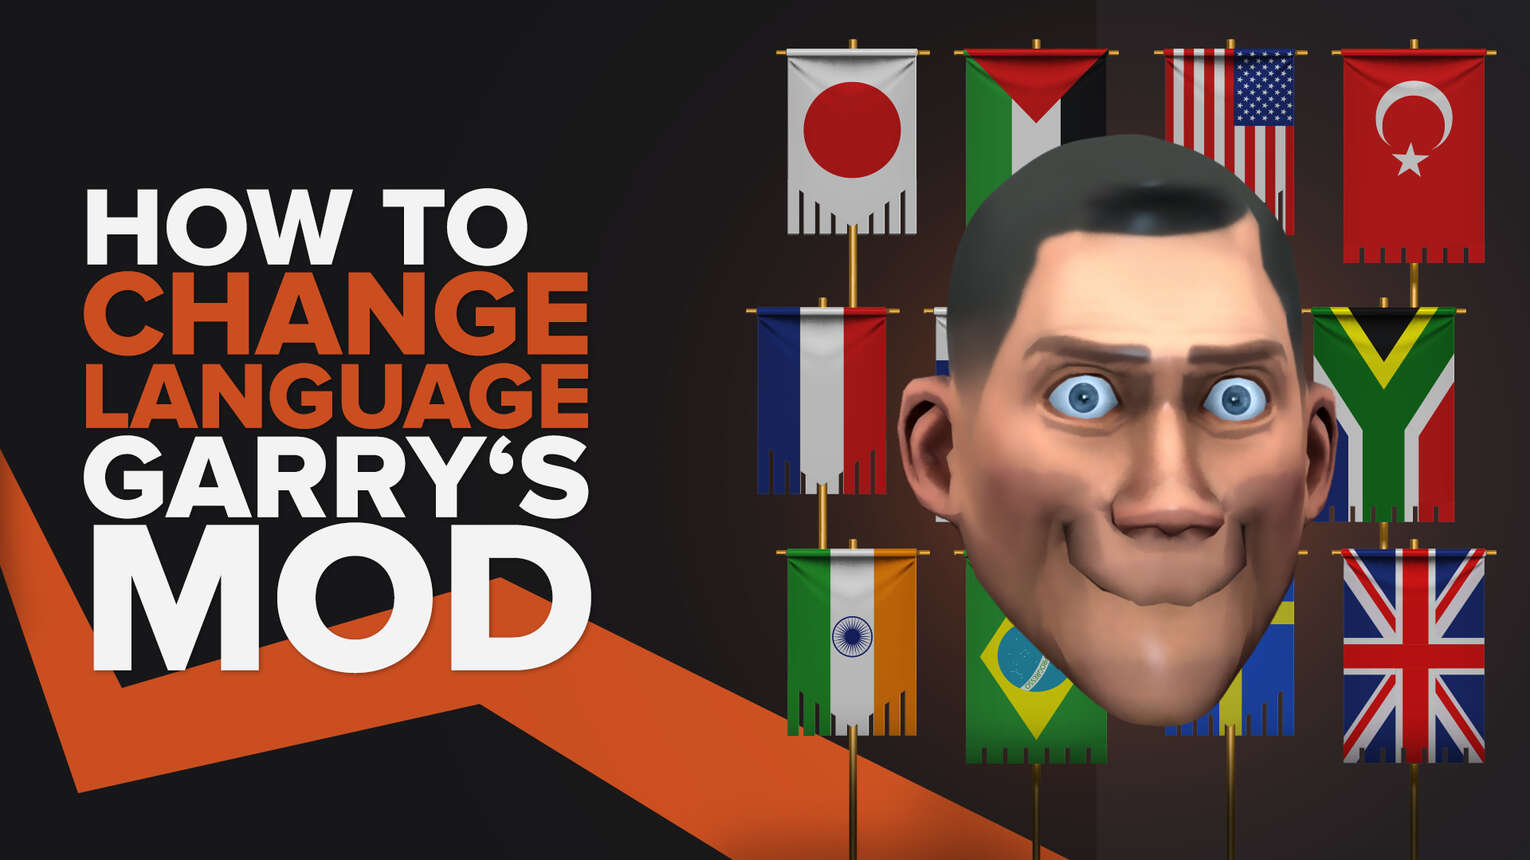 How To Quickly Change Language in Garry’s Mod